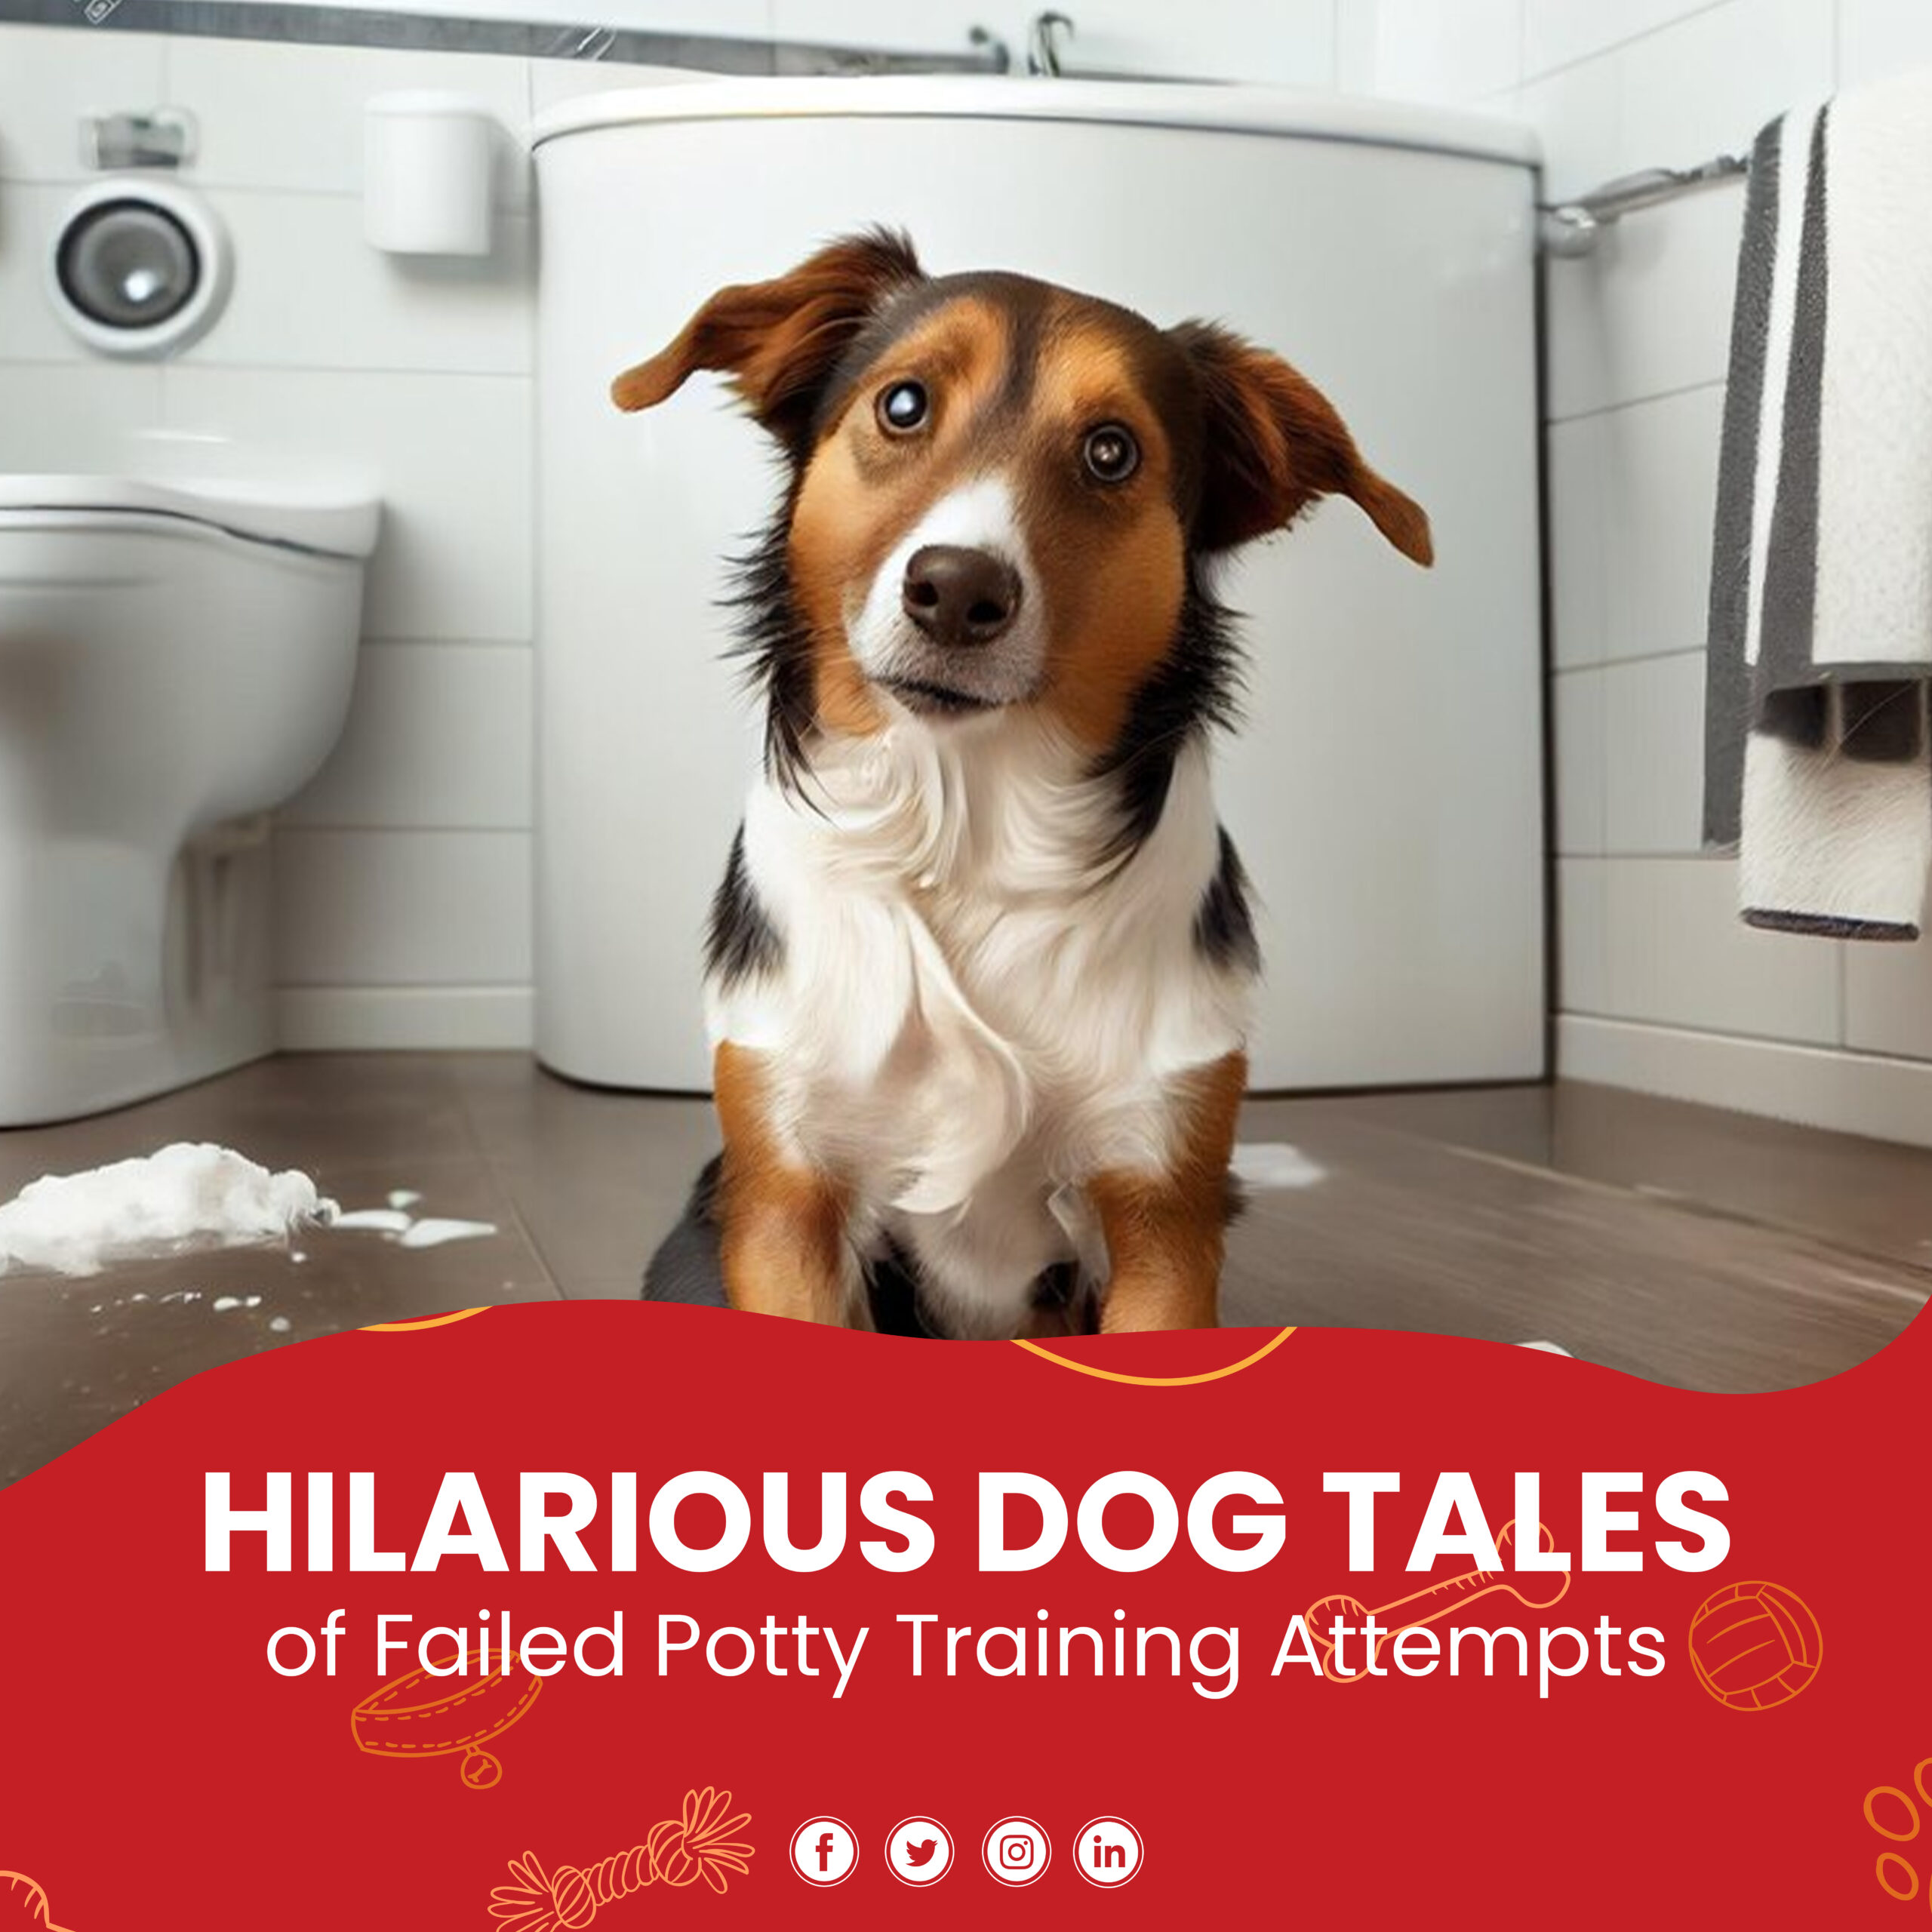 Hilarious Dog Tales of Failed Potty Training Attempts